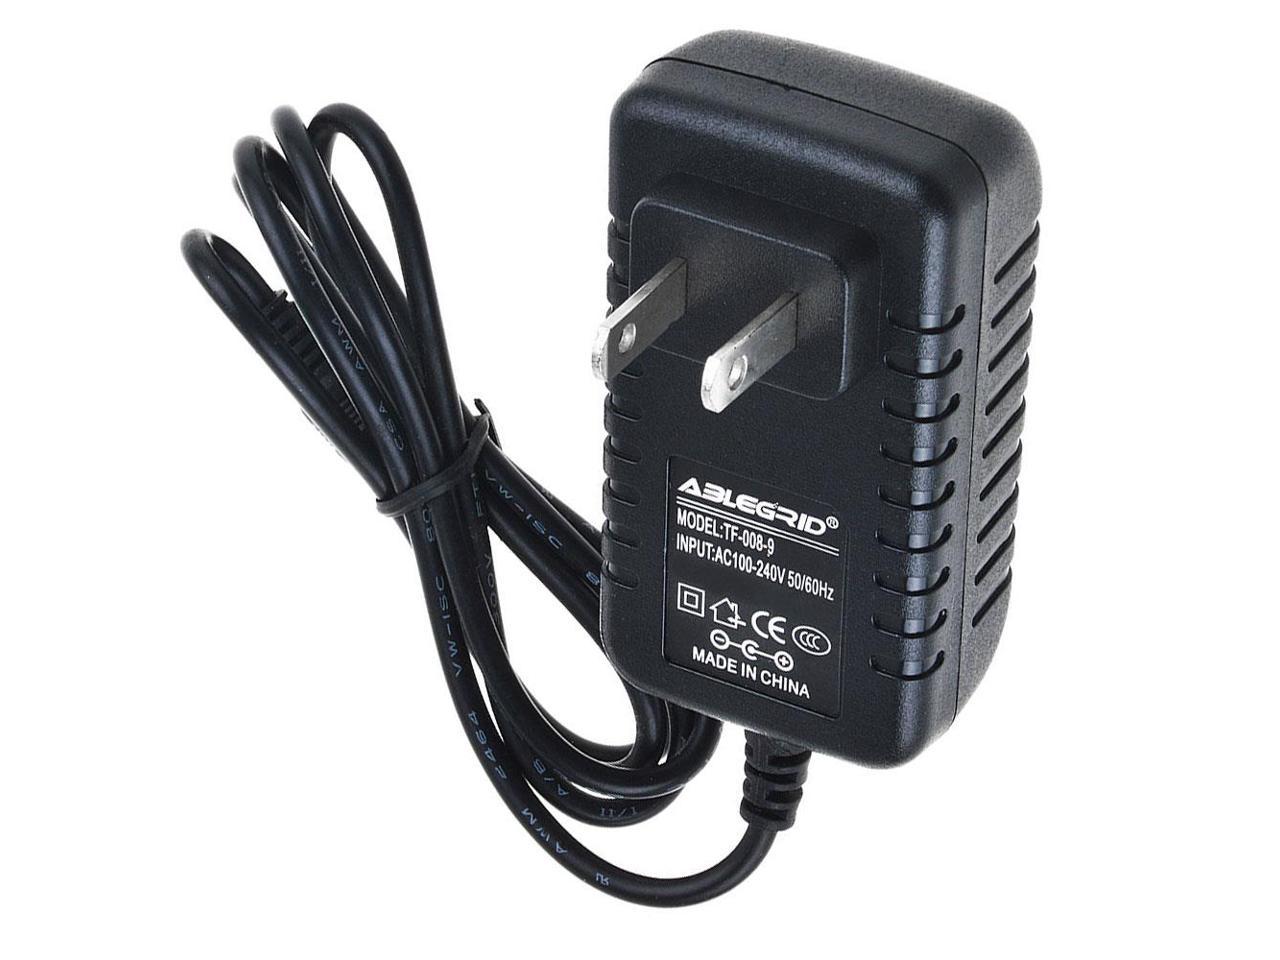 Accessory USA AC/DC Adapter for NEC A42406 NG-150642-001 NG150642001 VoIP IP Phone Class 2 Transformer Power Supply Cord Cable Charger Mains PSU 